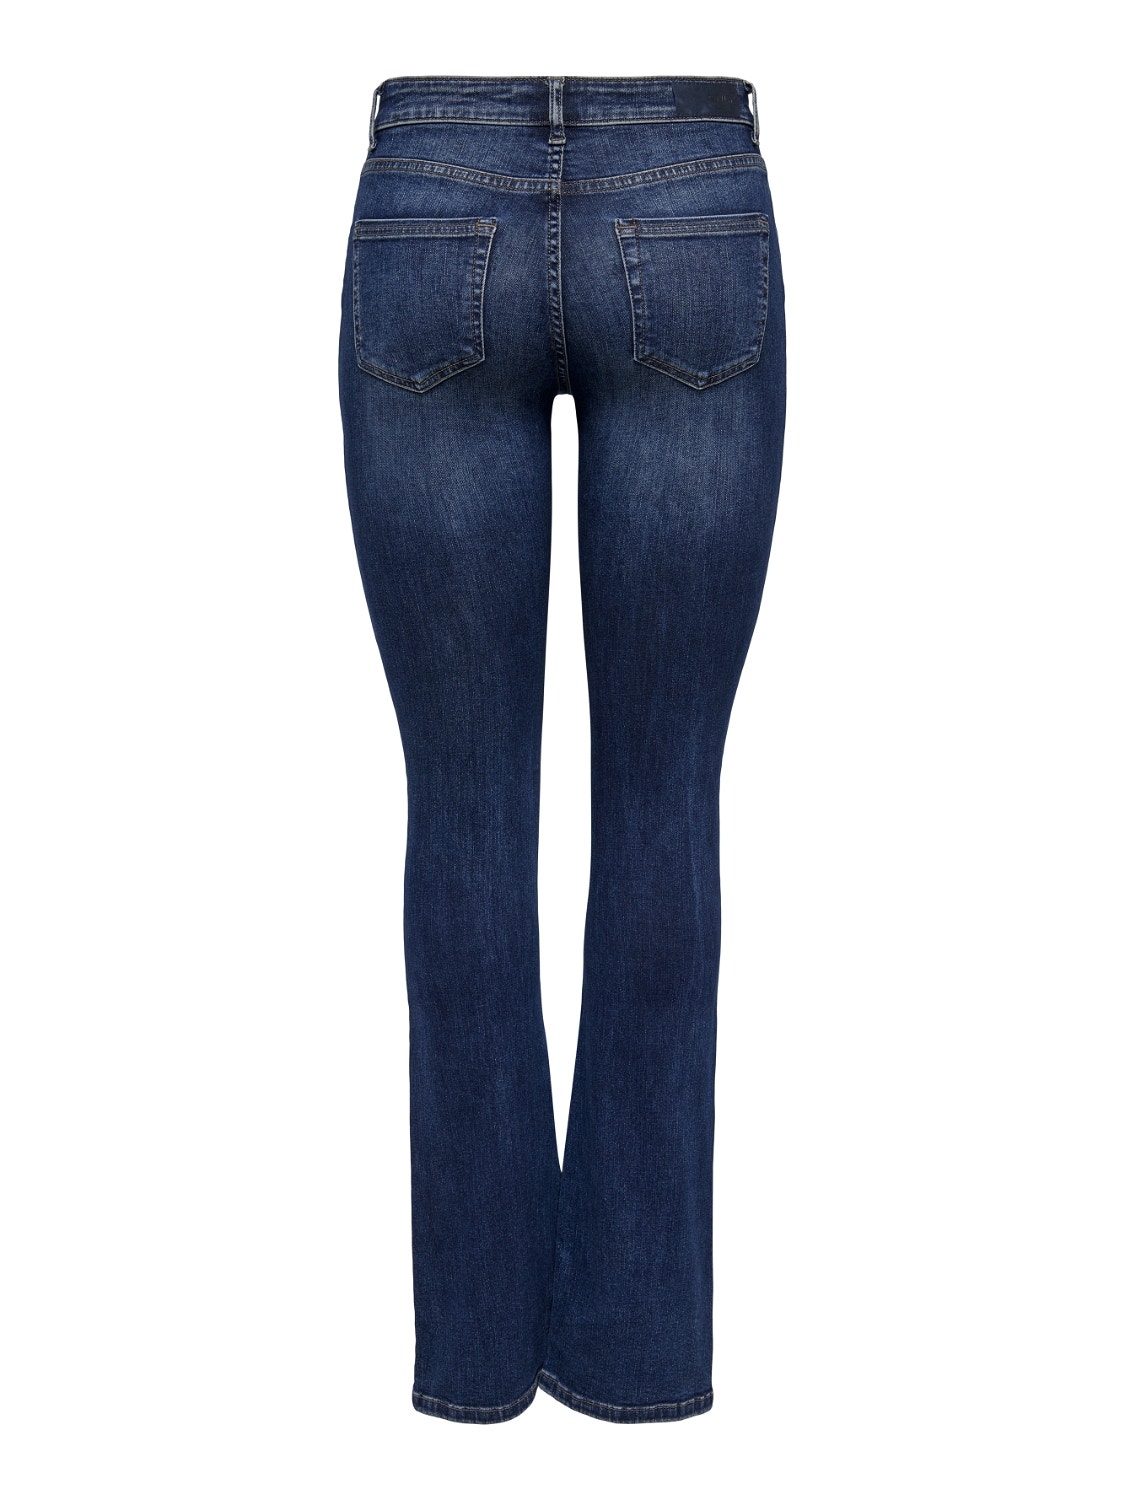 ONLY Jeans Flared Fit Taille moyenne -Dark Blue Denim - 15264050